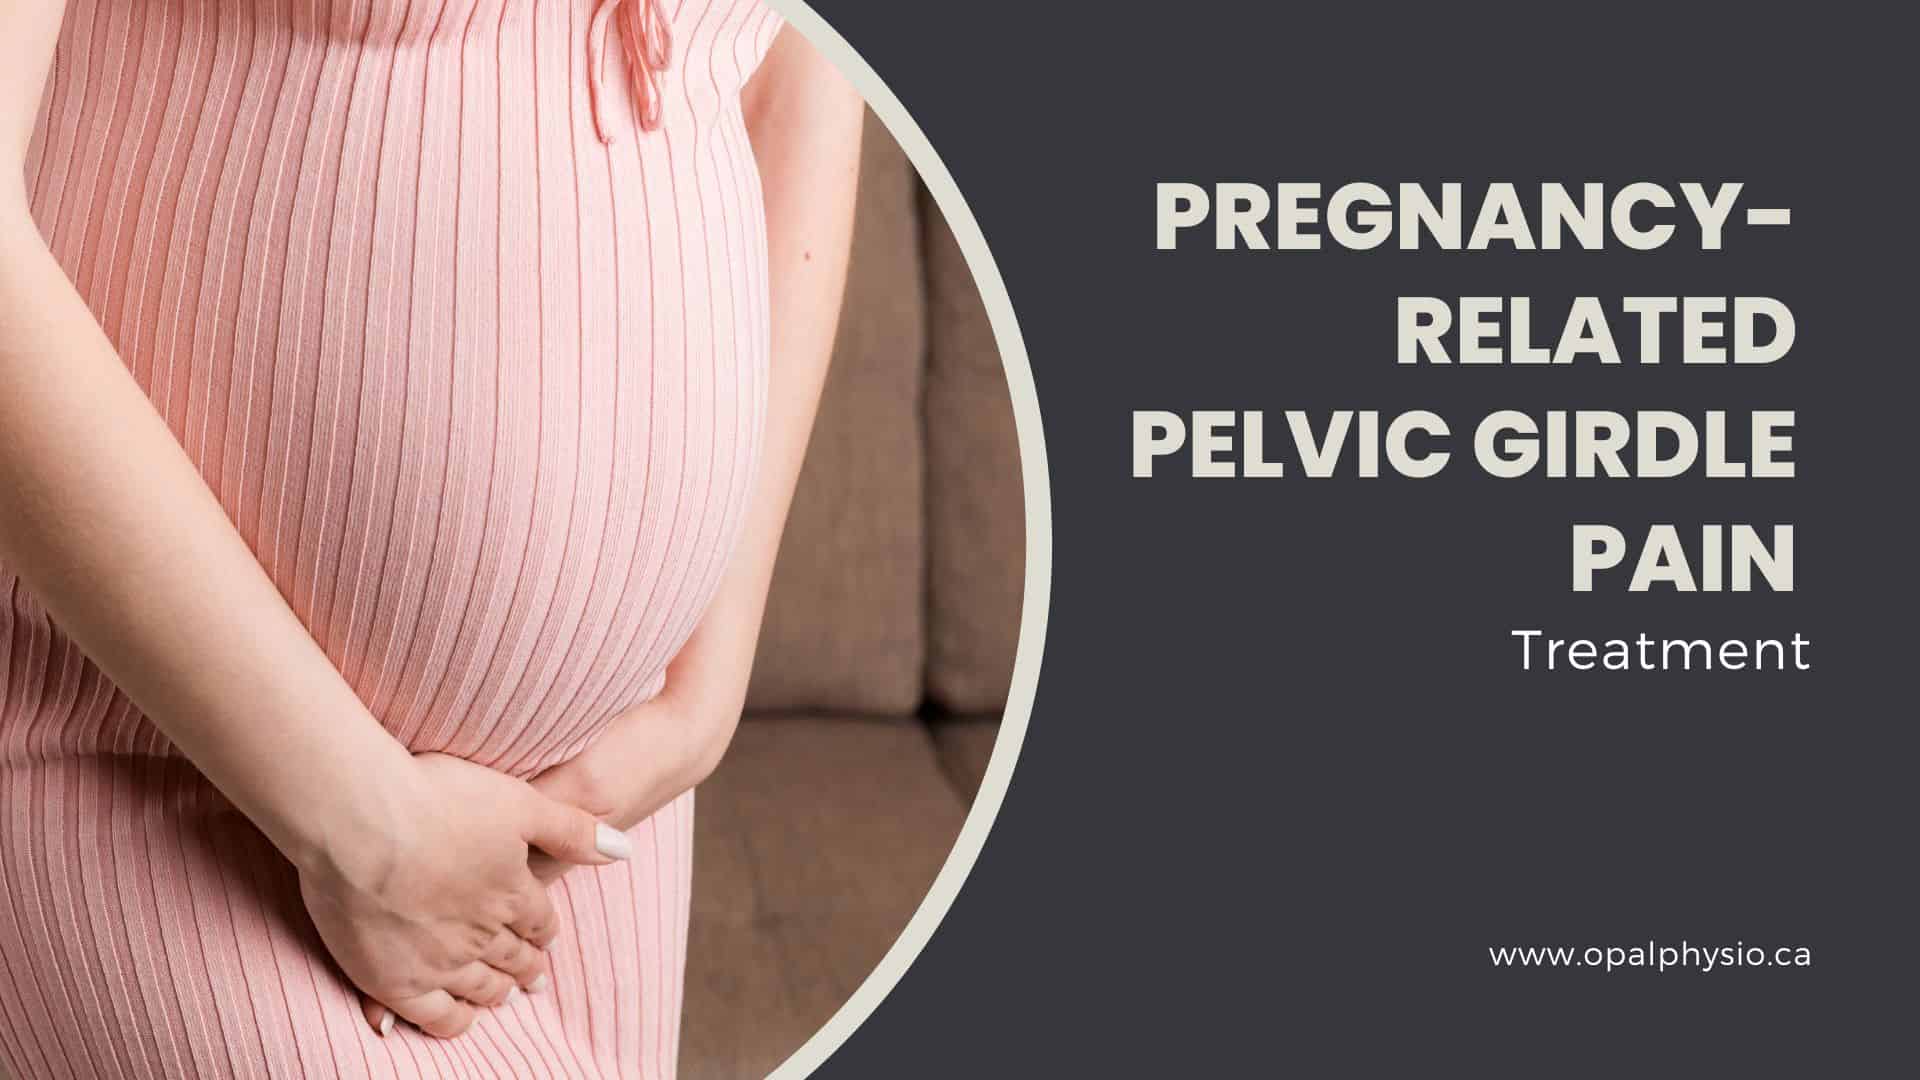 Pregnancy Related Pain